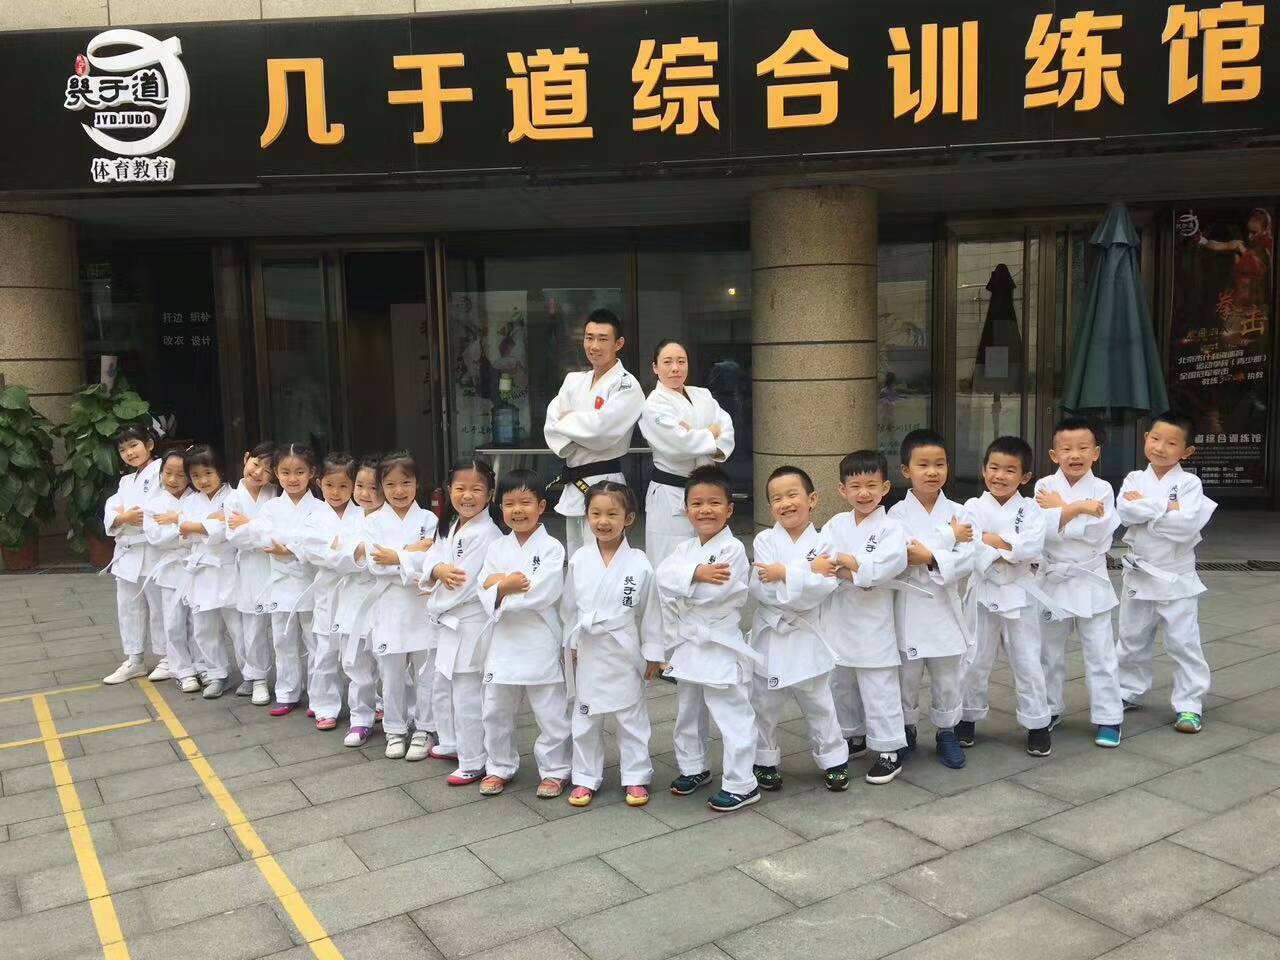 Children lining up in judo uniform in front of Yi Zhuang judo location